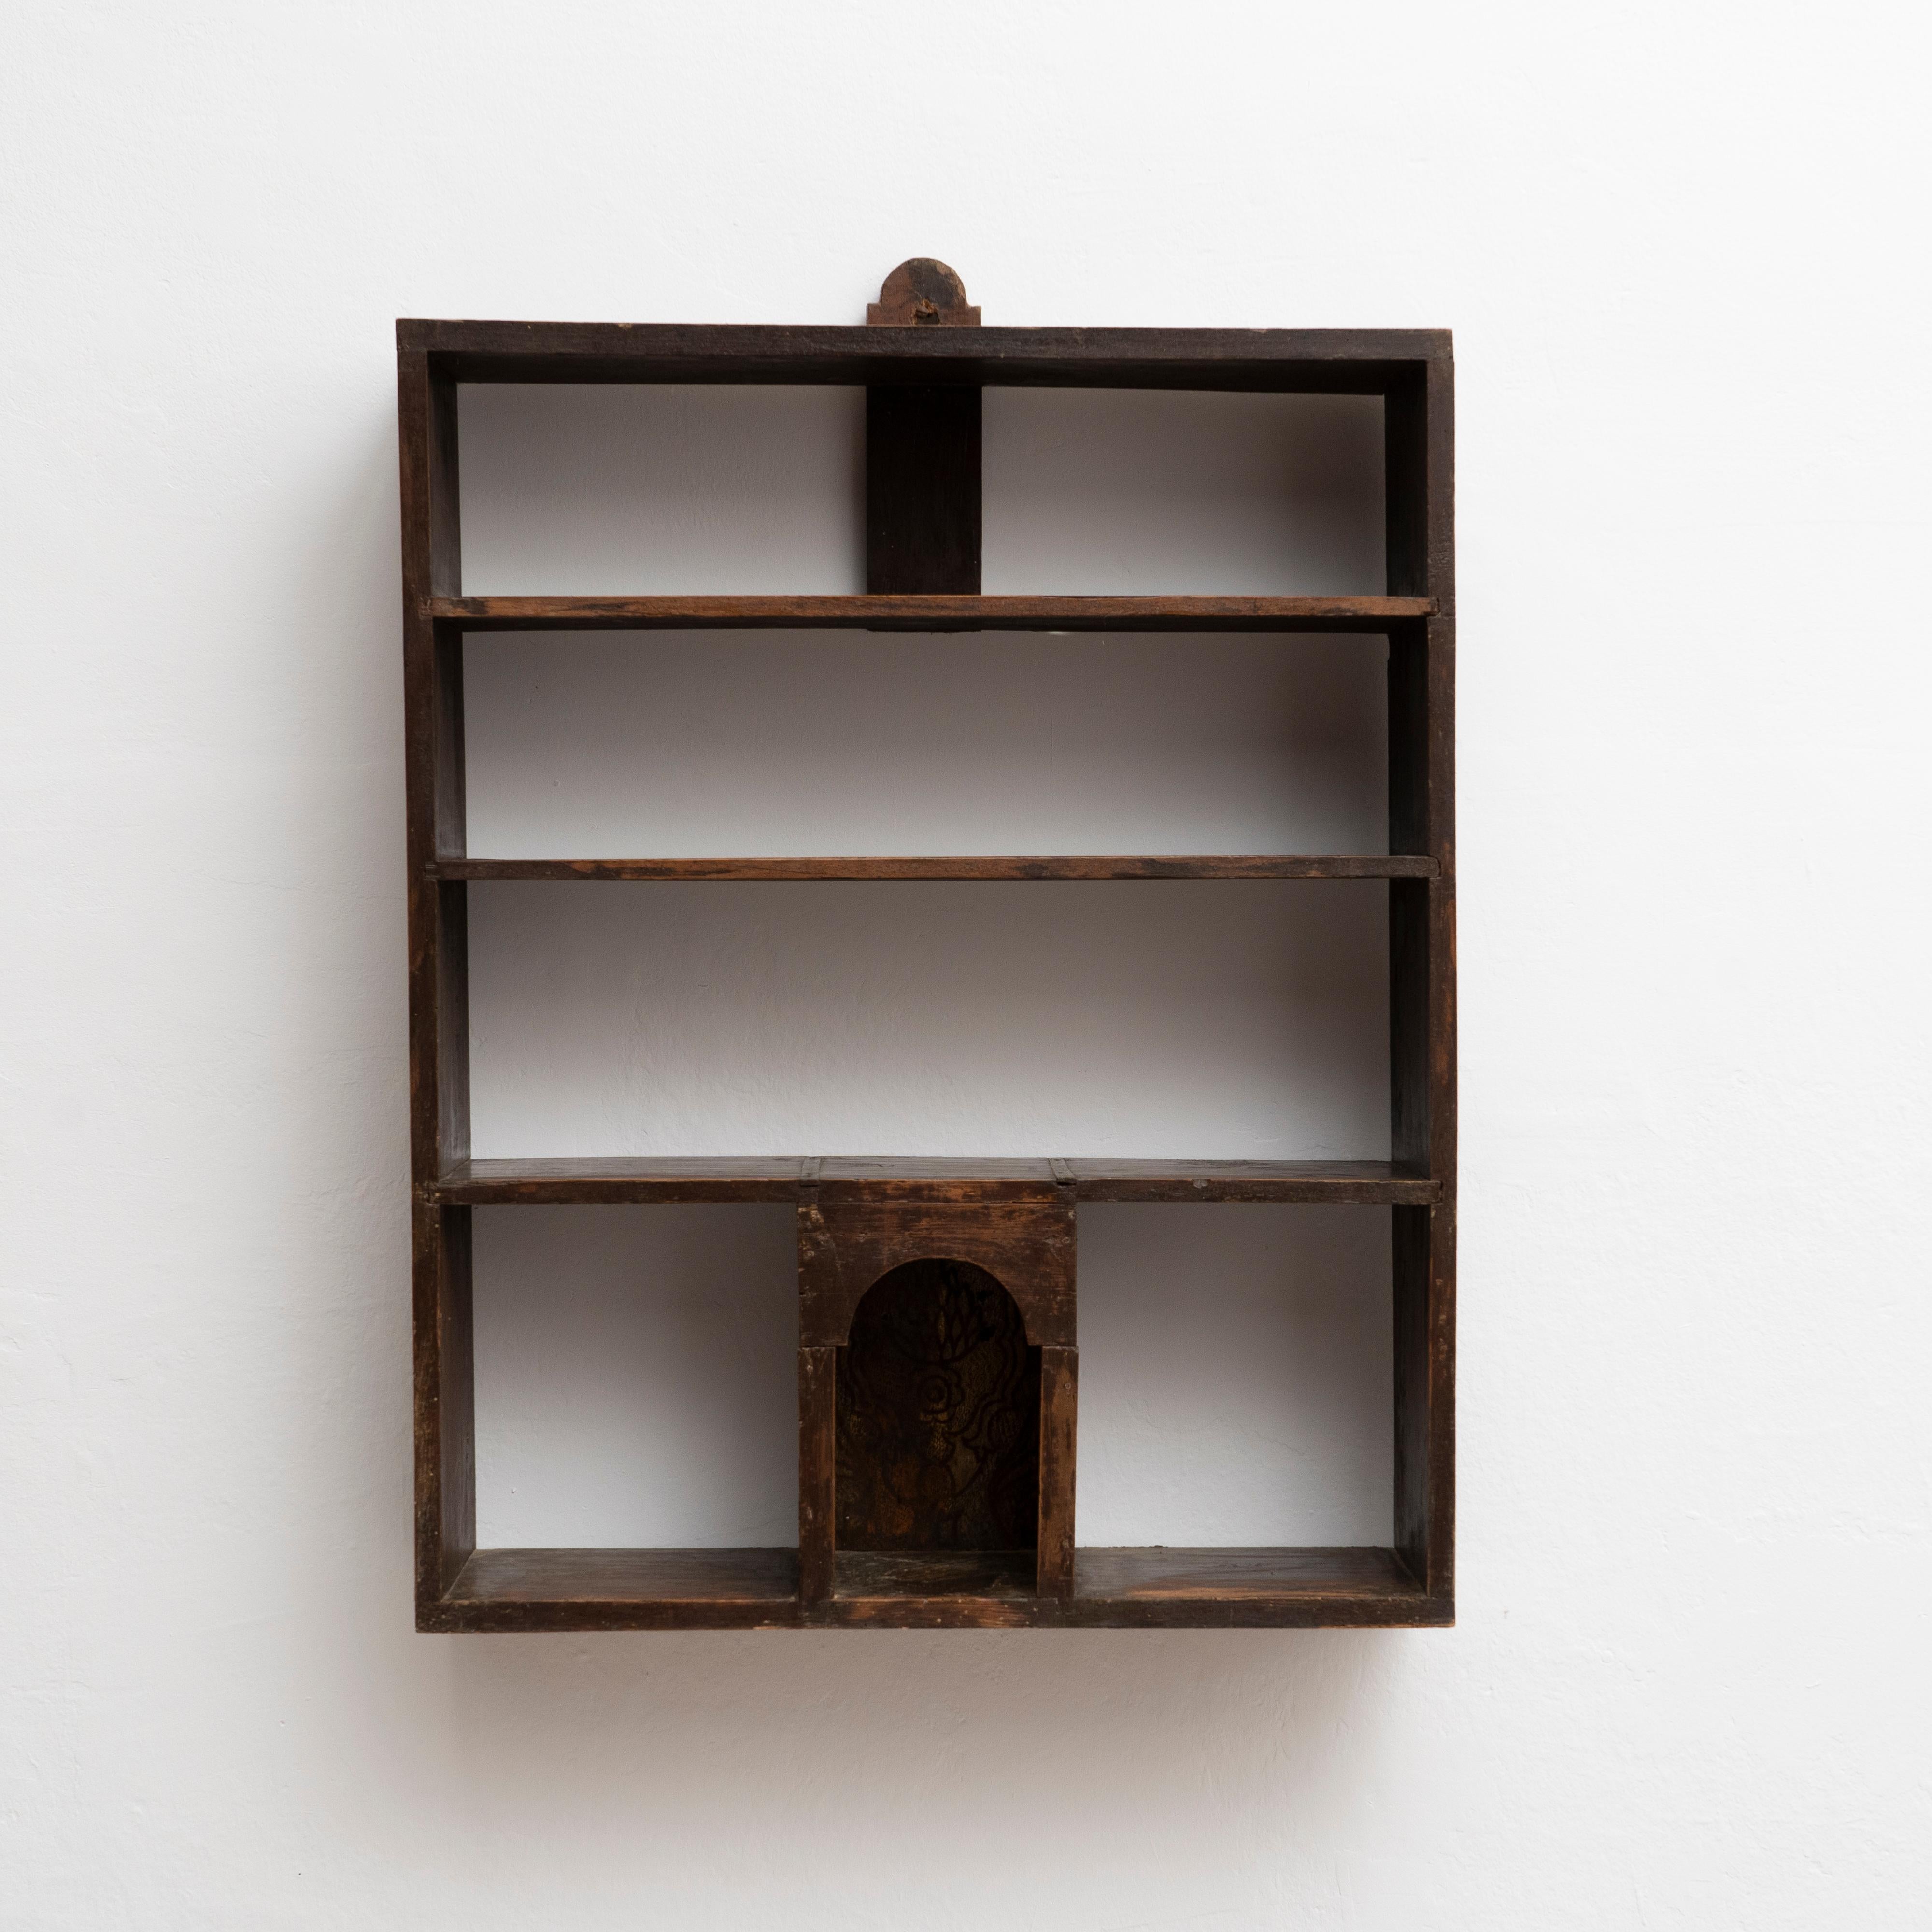 Early 20th century Spanish wall shelve unit.

Made by unknown manufacturer from France, circa 1930.

In original condition, with minor wear consistent with age and use, preserving a beautiful patina.

Material:
Wood.
  